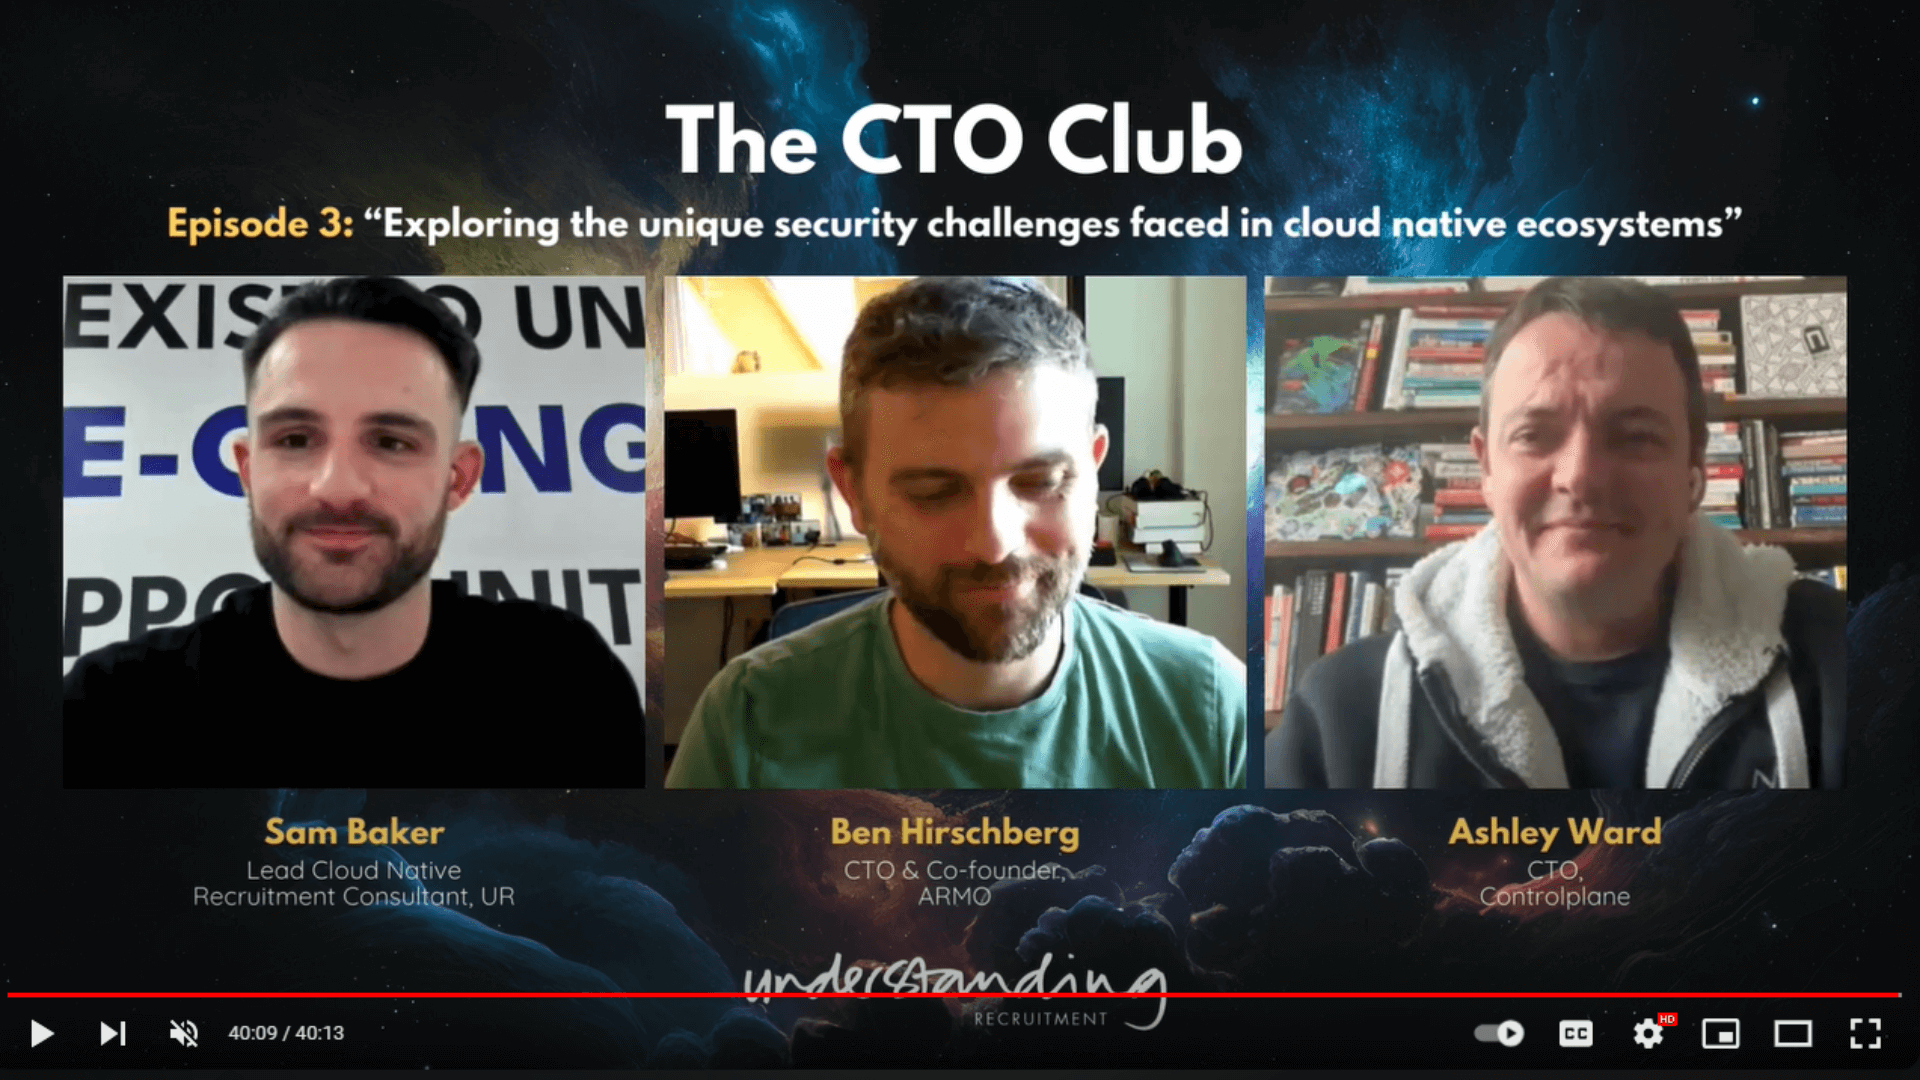 The CTO Club Episode 3: Exploring the Unique Security Challenges Faced in Cloud Native Ecosystems